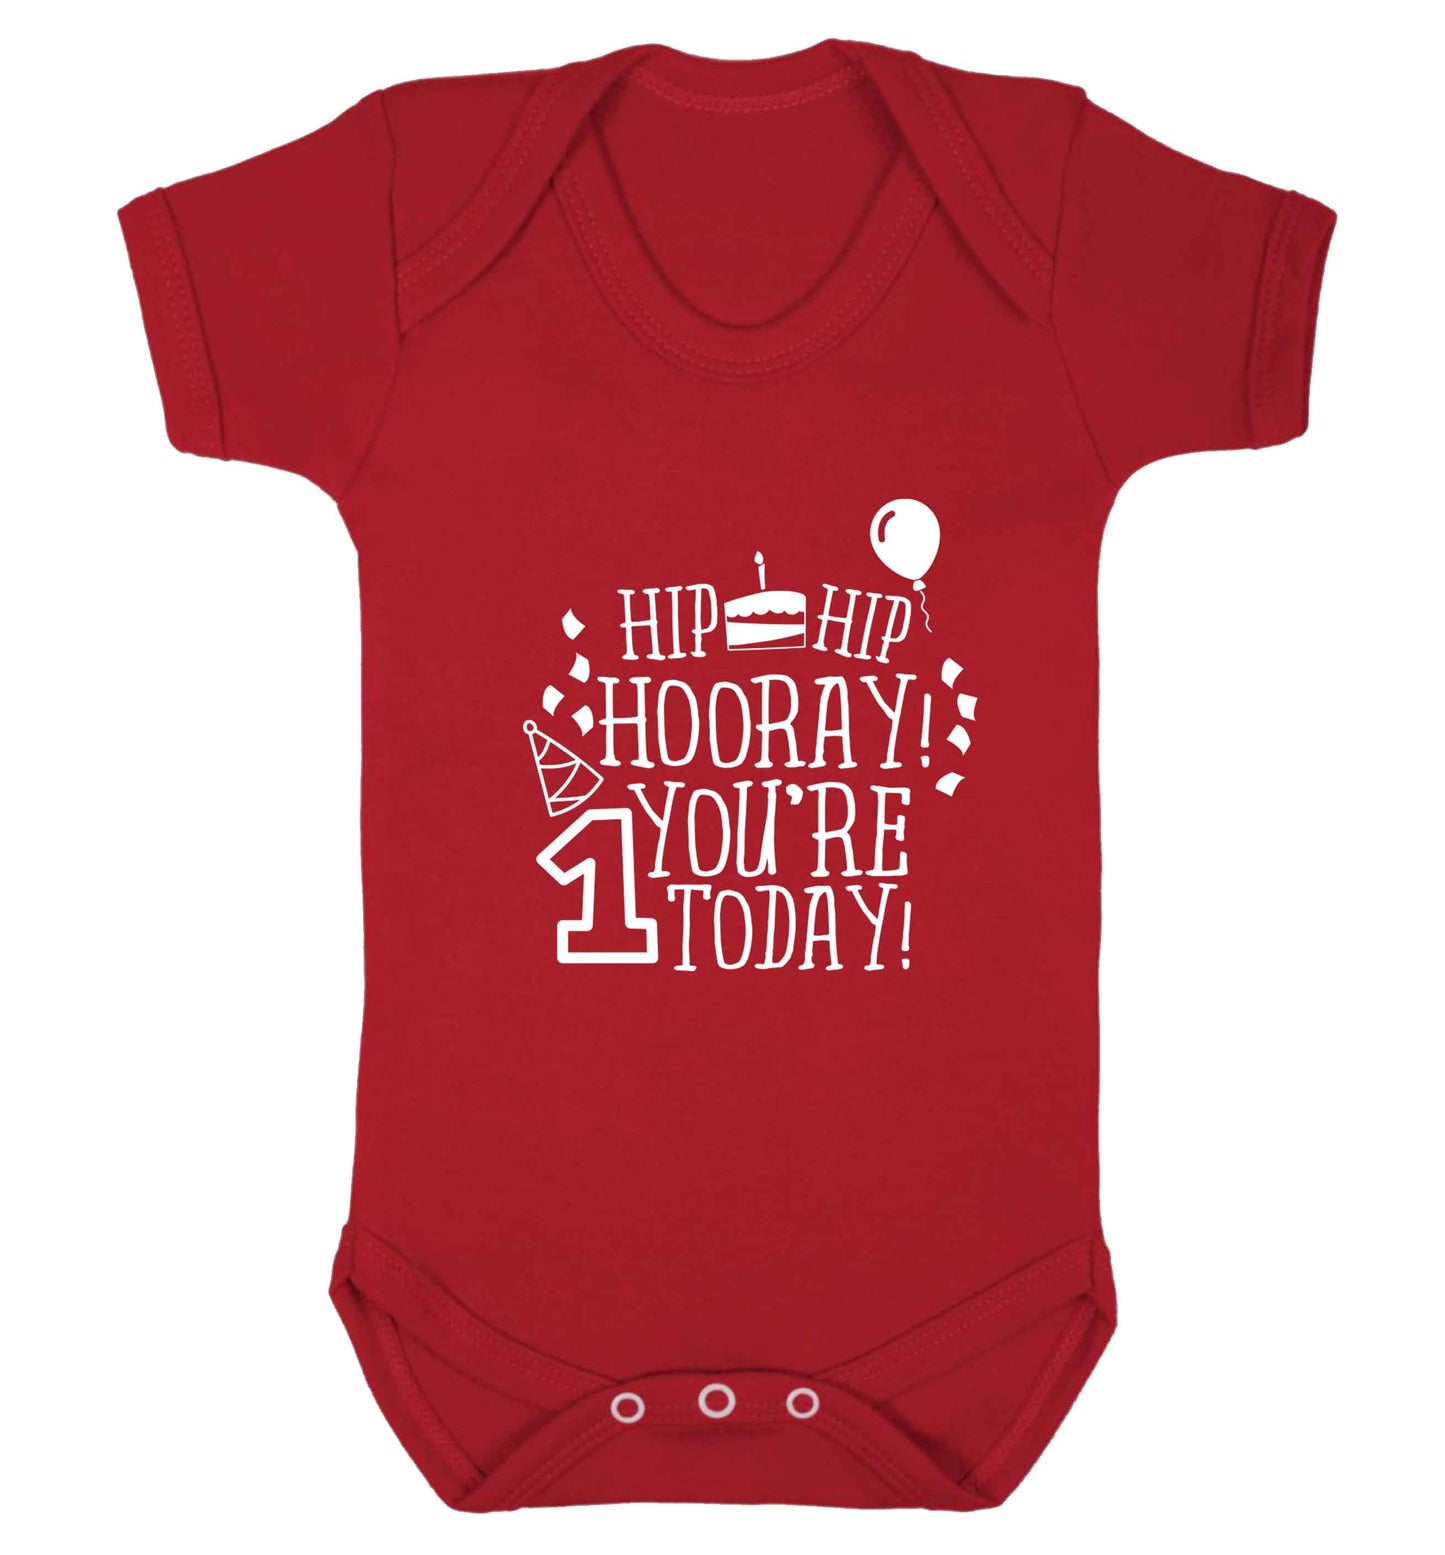 You're one today baby vest red 18-24 months